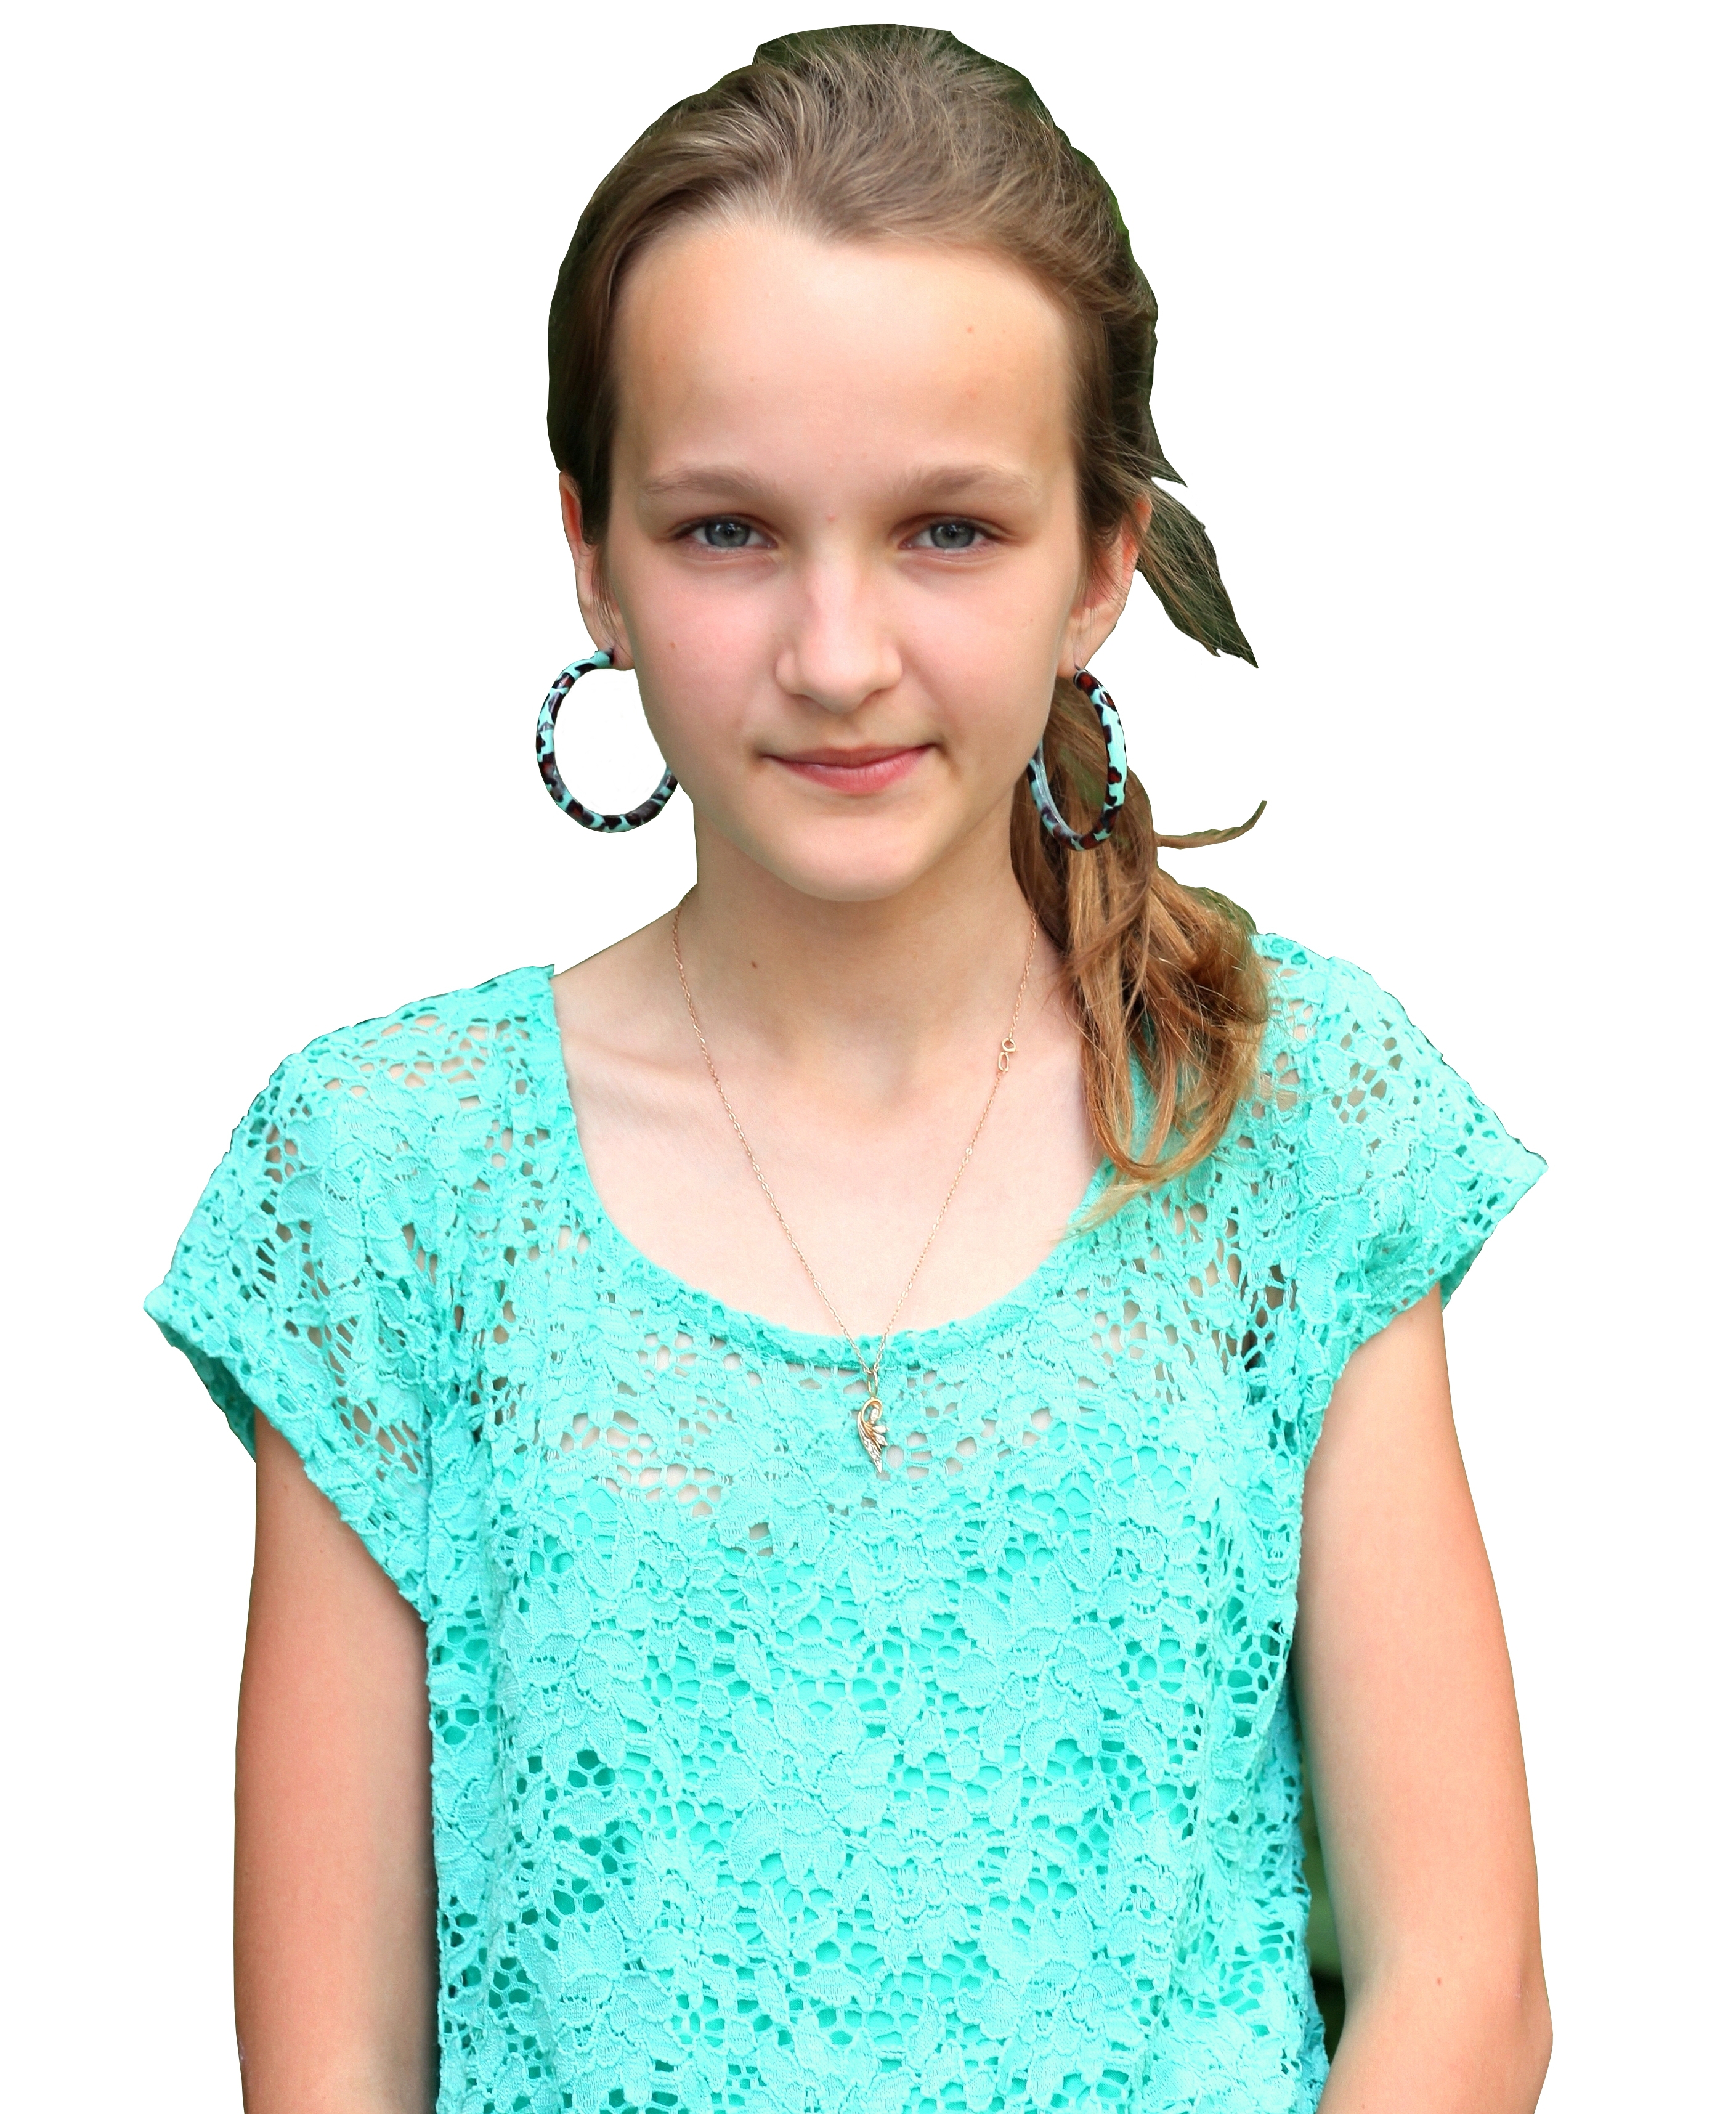 an absolutely beautiful girl with huge earrings, photographed in June 2013, portrait 8/27